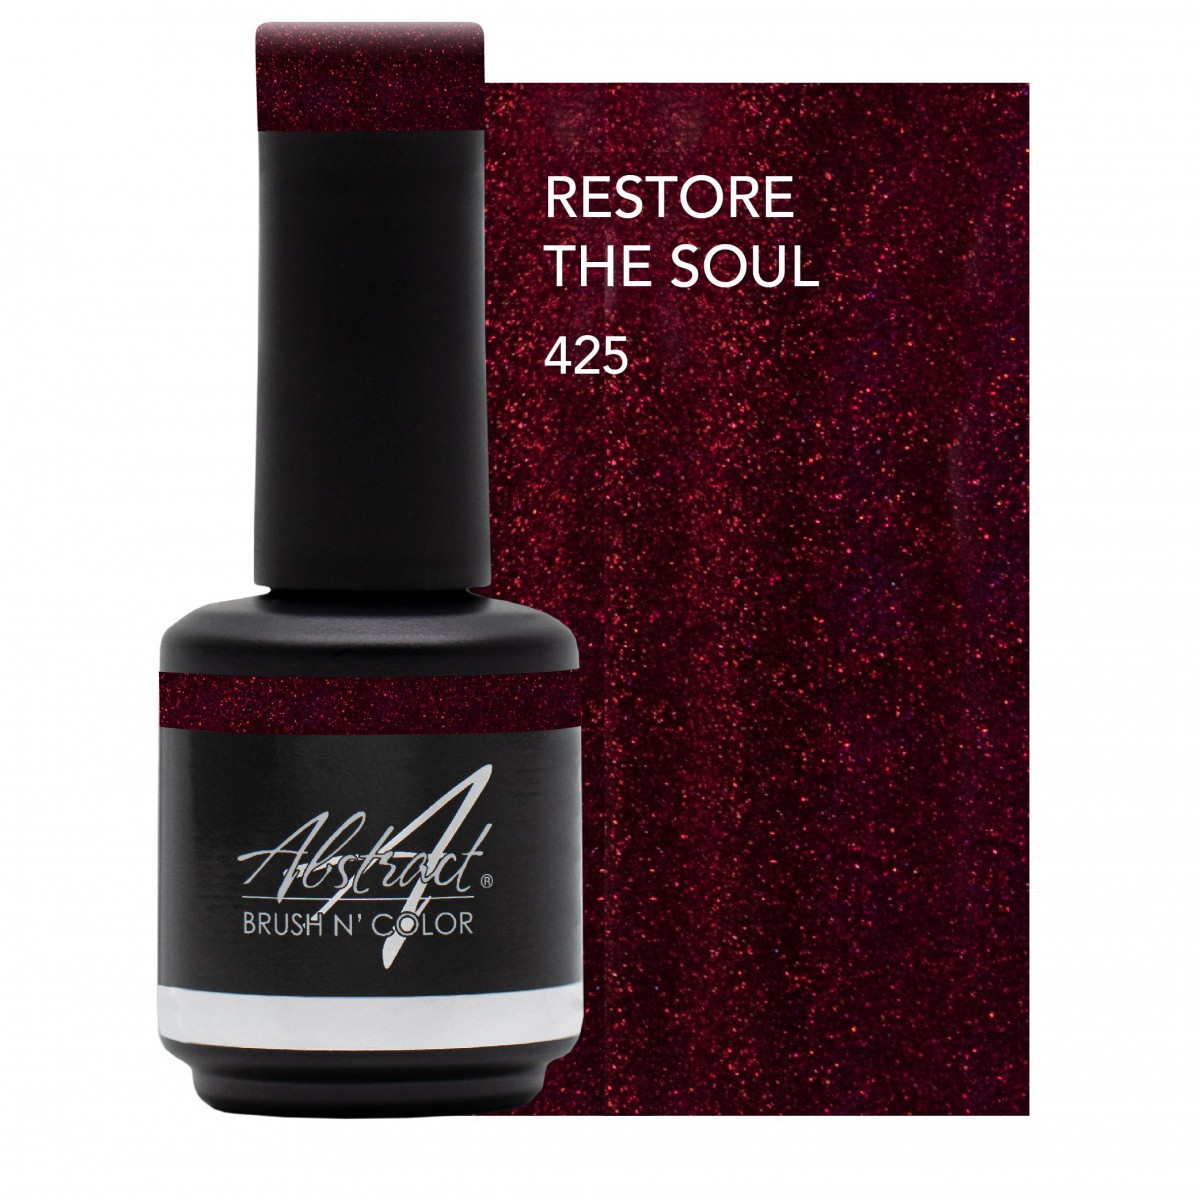 Abstract Restore The Soul 15 ml